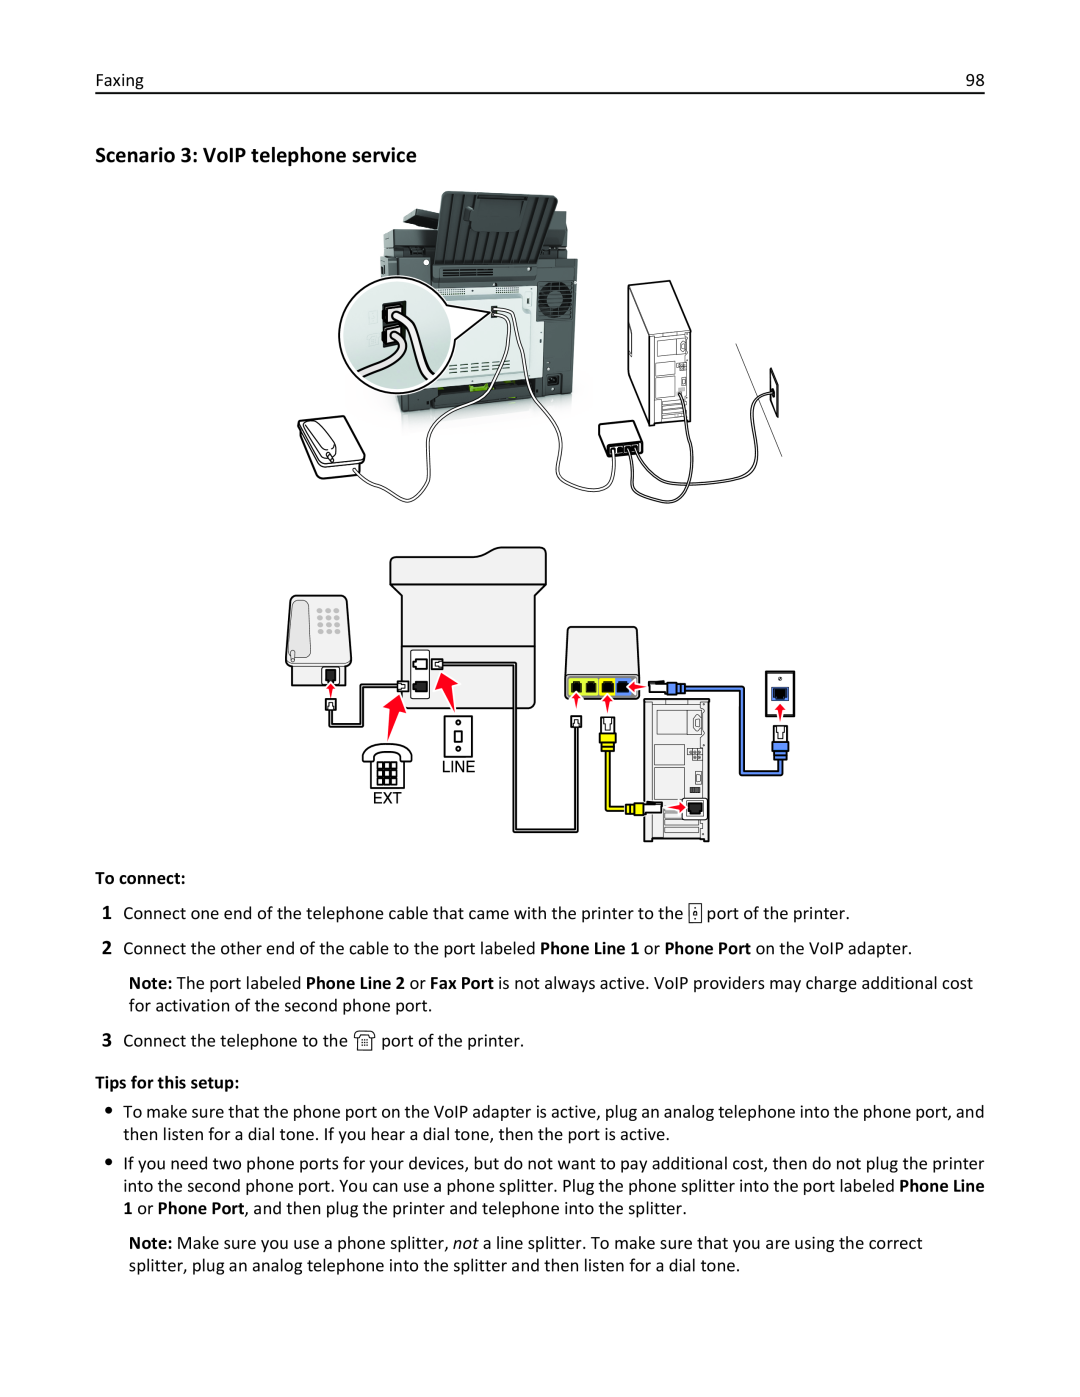 Lexmark 436 manual Scenario 3 VoIP telephone service, To connect, Tips for this setup 